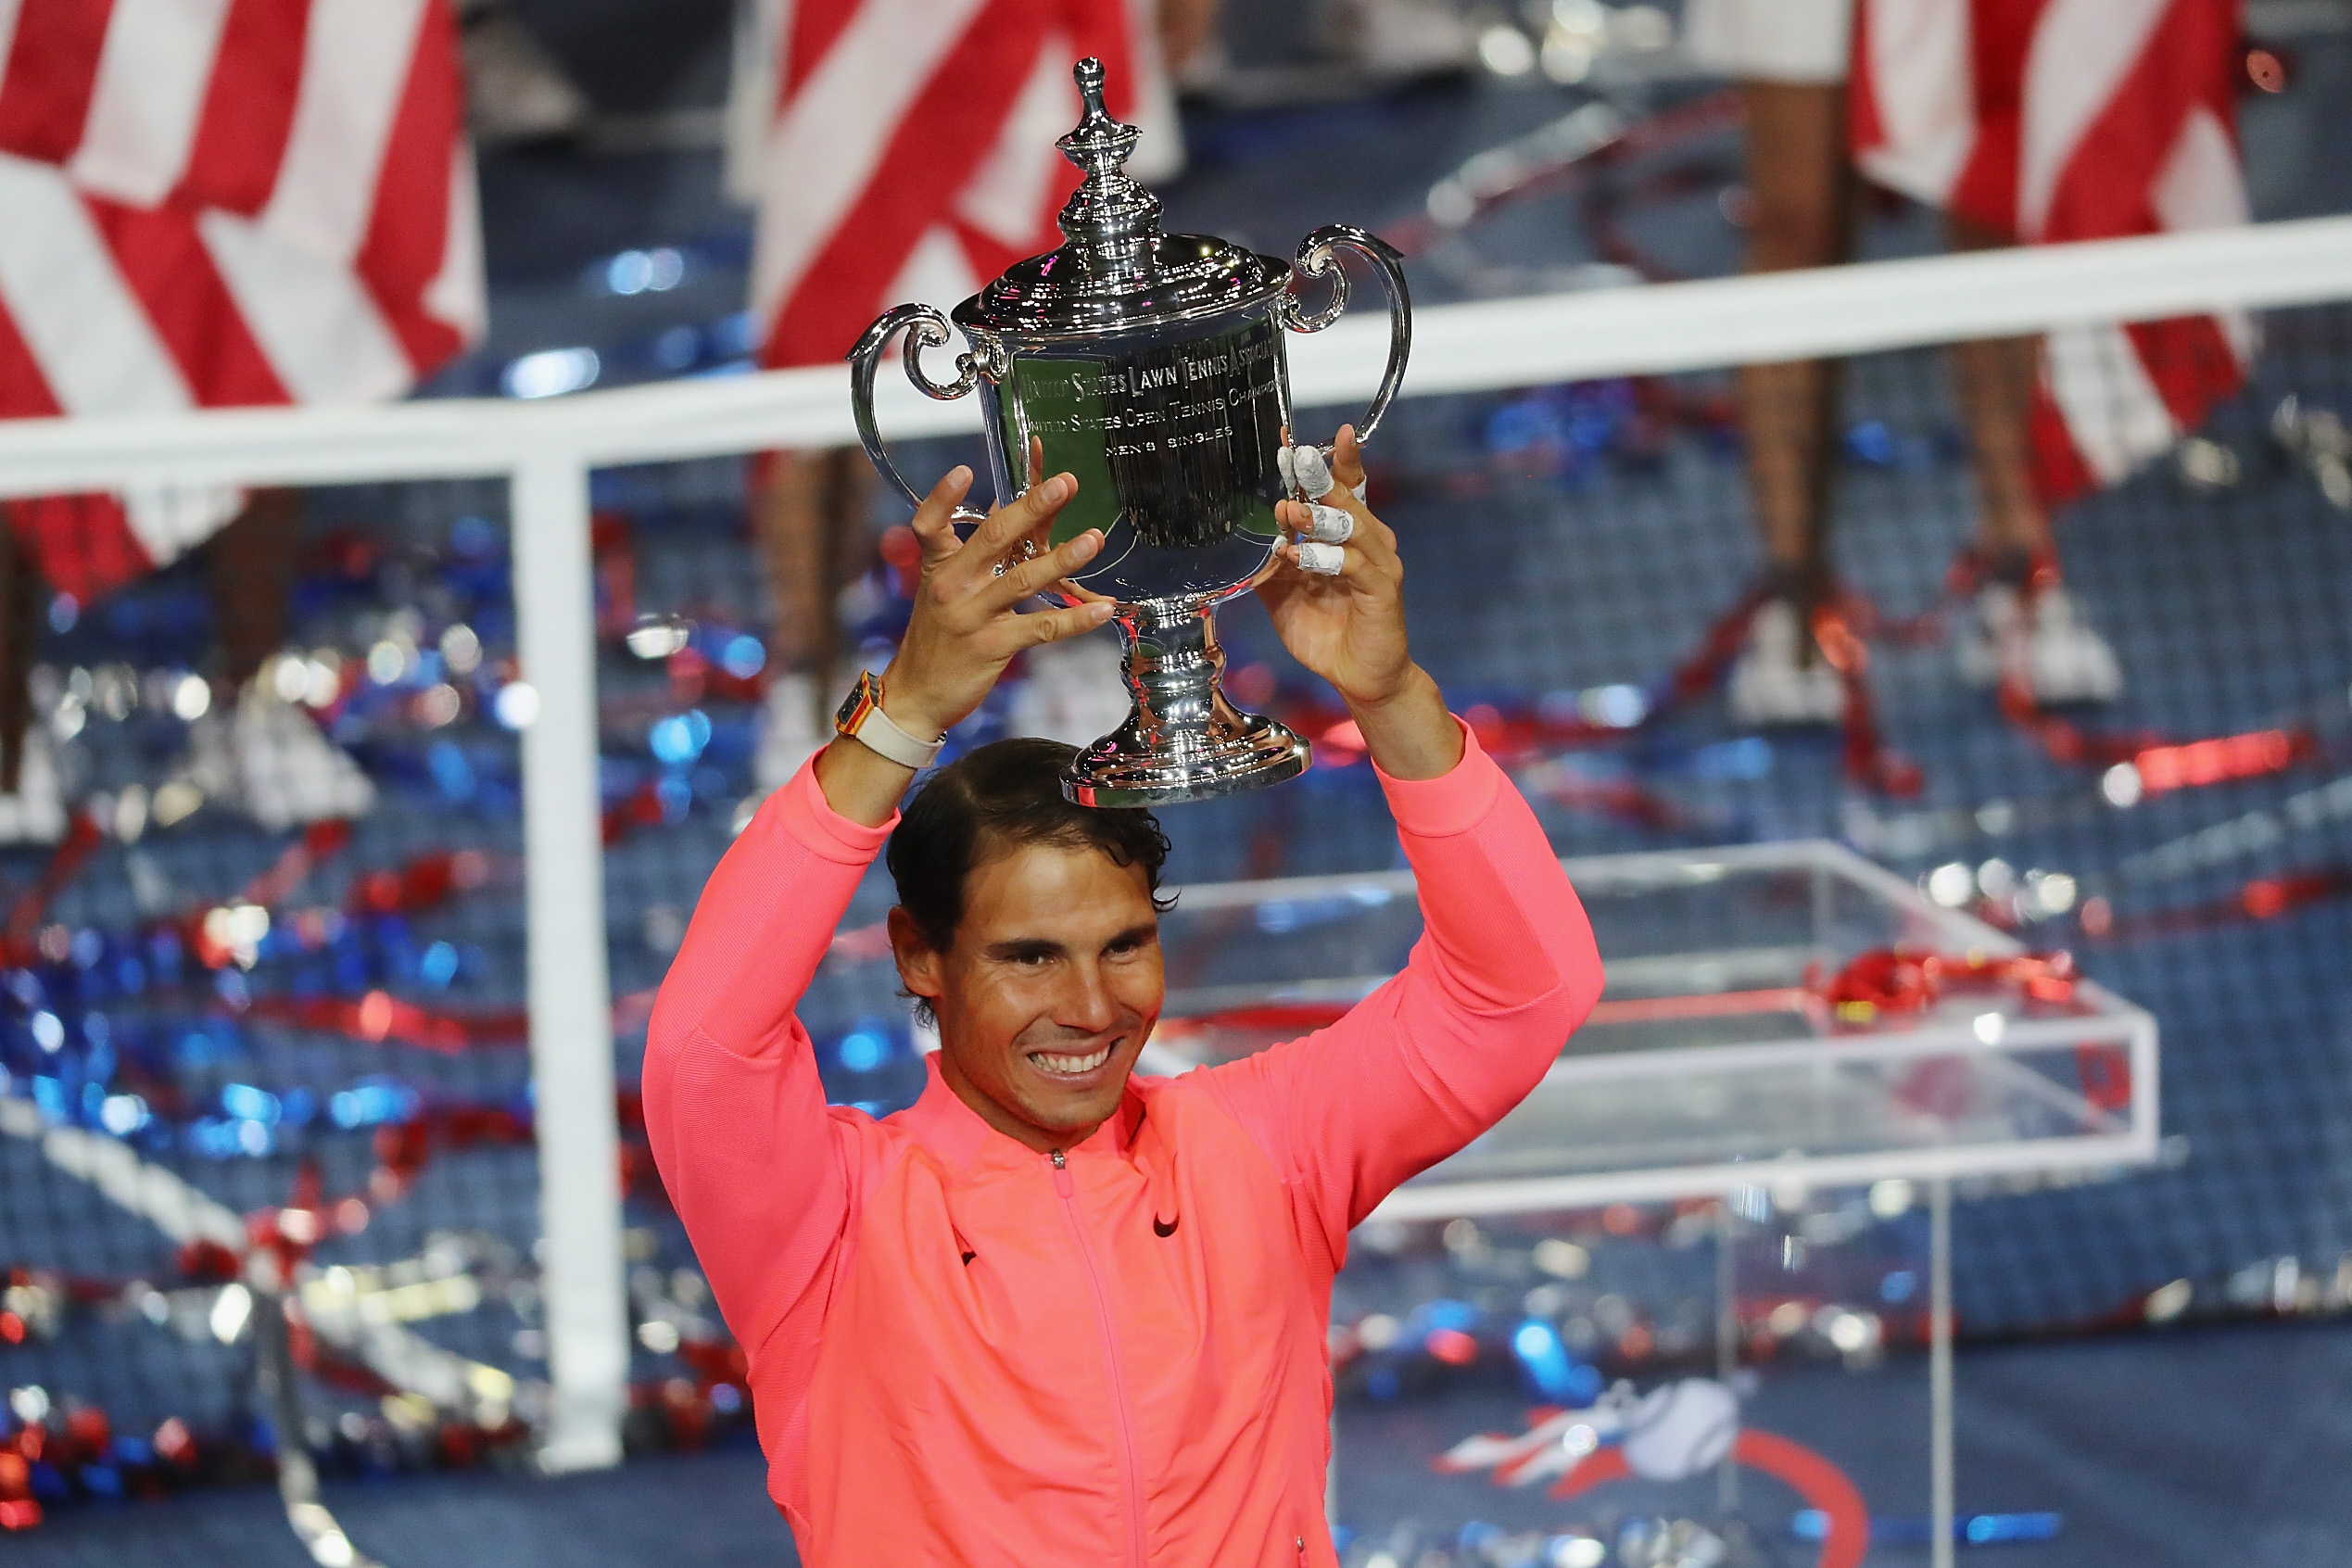 Rafael Nadal of Spain poses with the U.S. Open championship trophy after he defeated Kevin Anderson of South Africa in the Men's Singles Finals match on  on September 10, 2017 in New York City. (Abbie Parr—Getty Images)